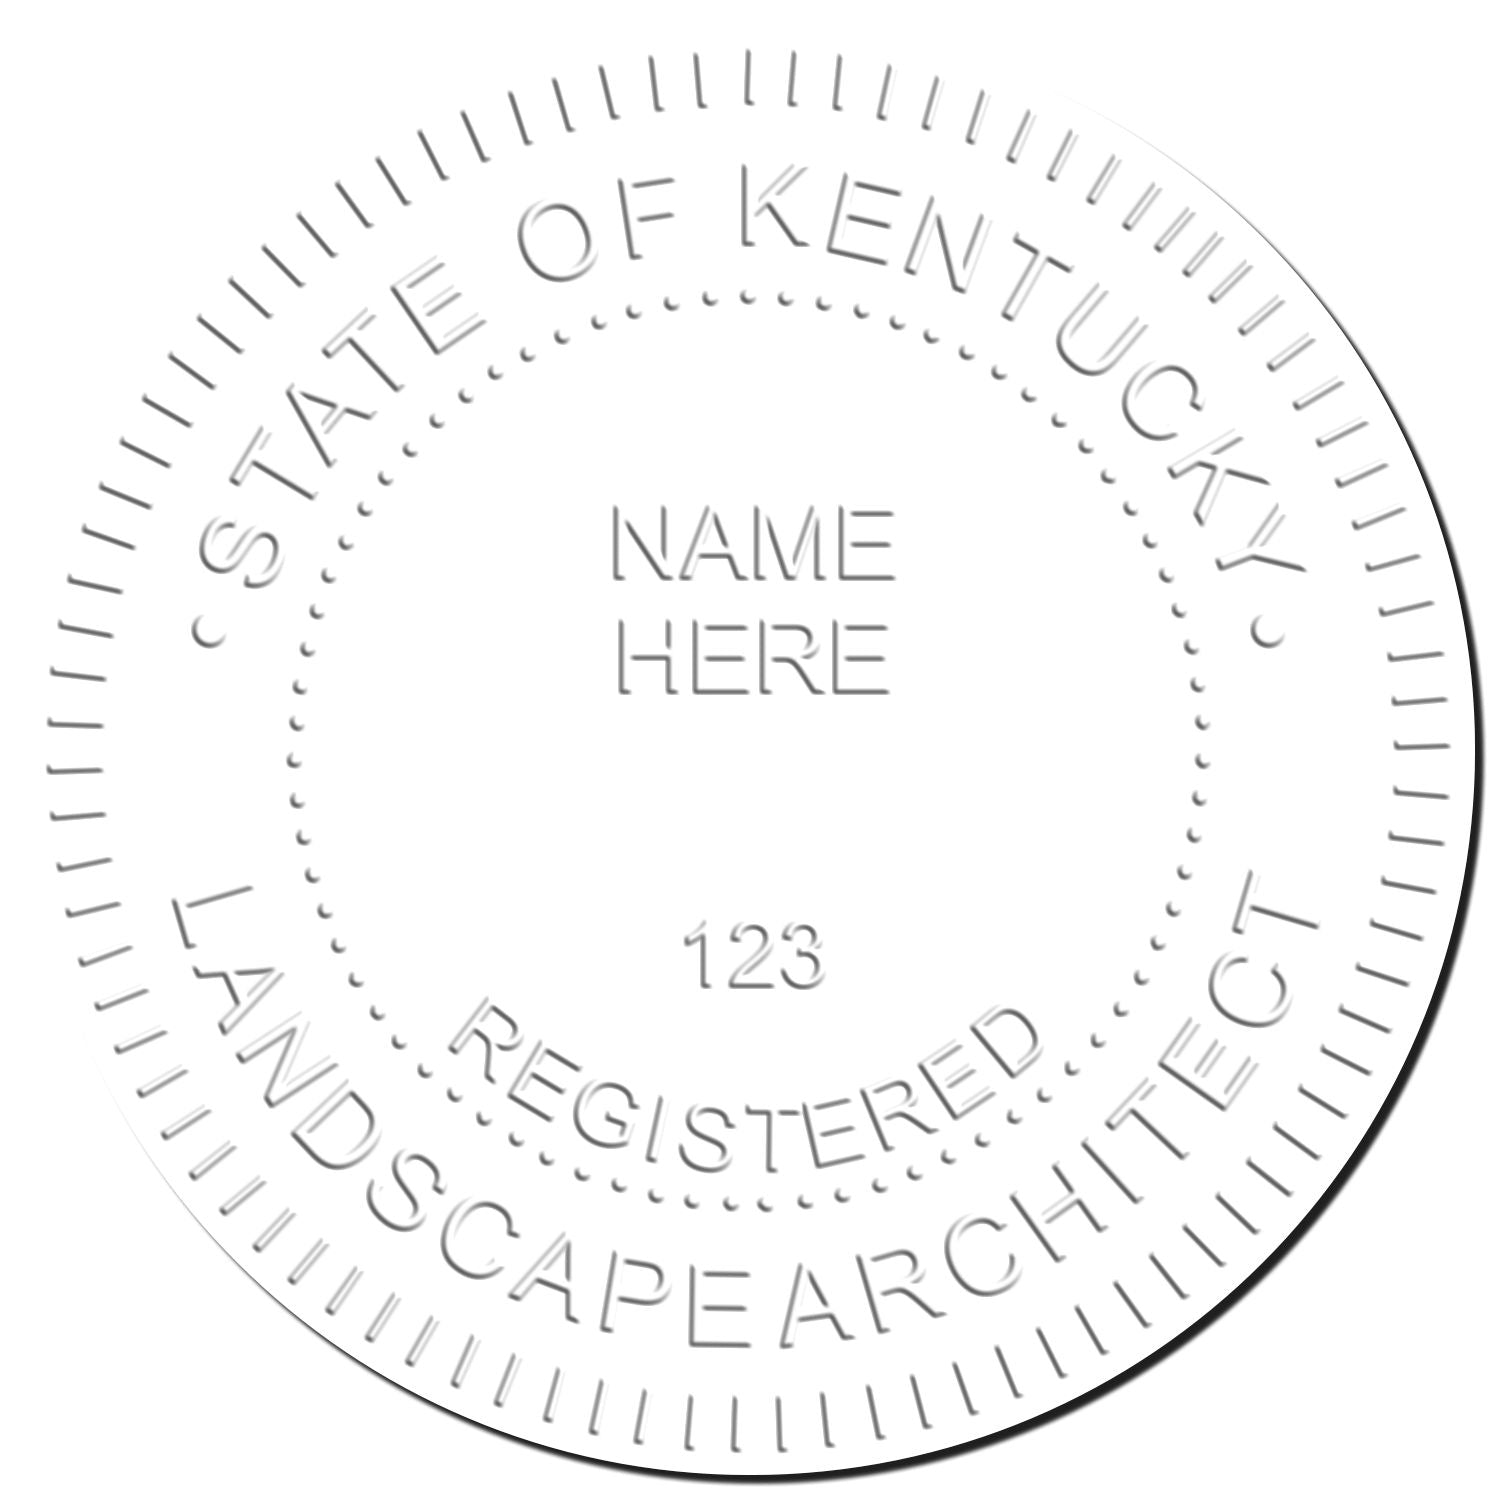 This paper is stamped with a sample imprint of the Soft Pocket Kentucky Landscape Architect Embosser, signifying its quality and reliability.